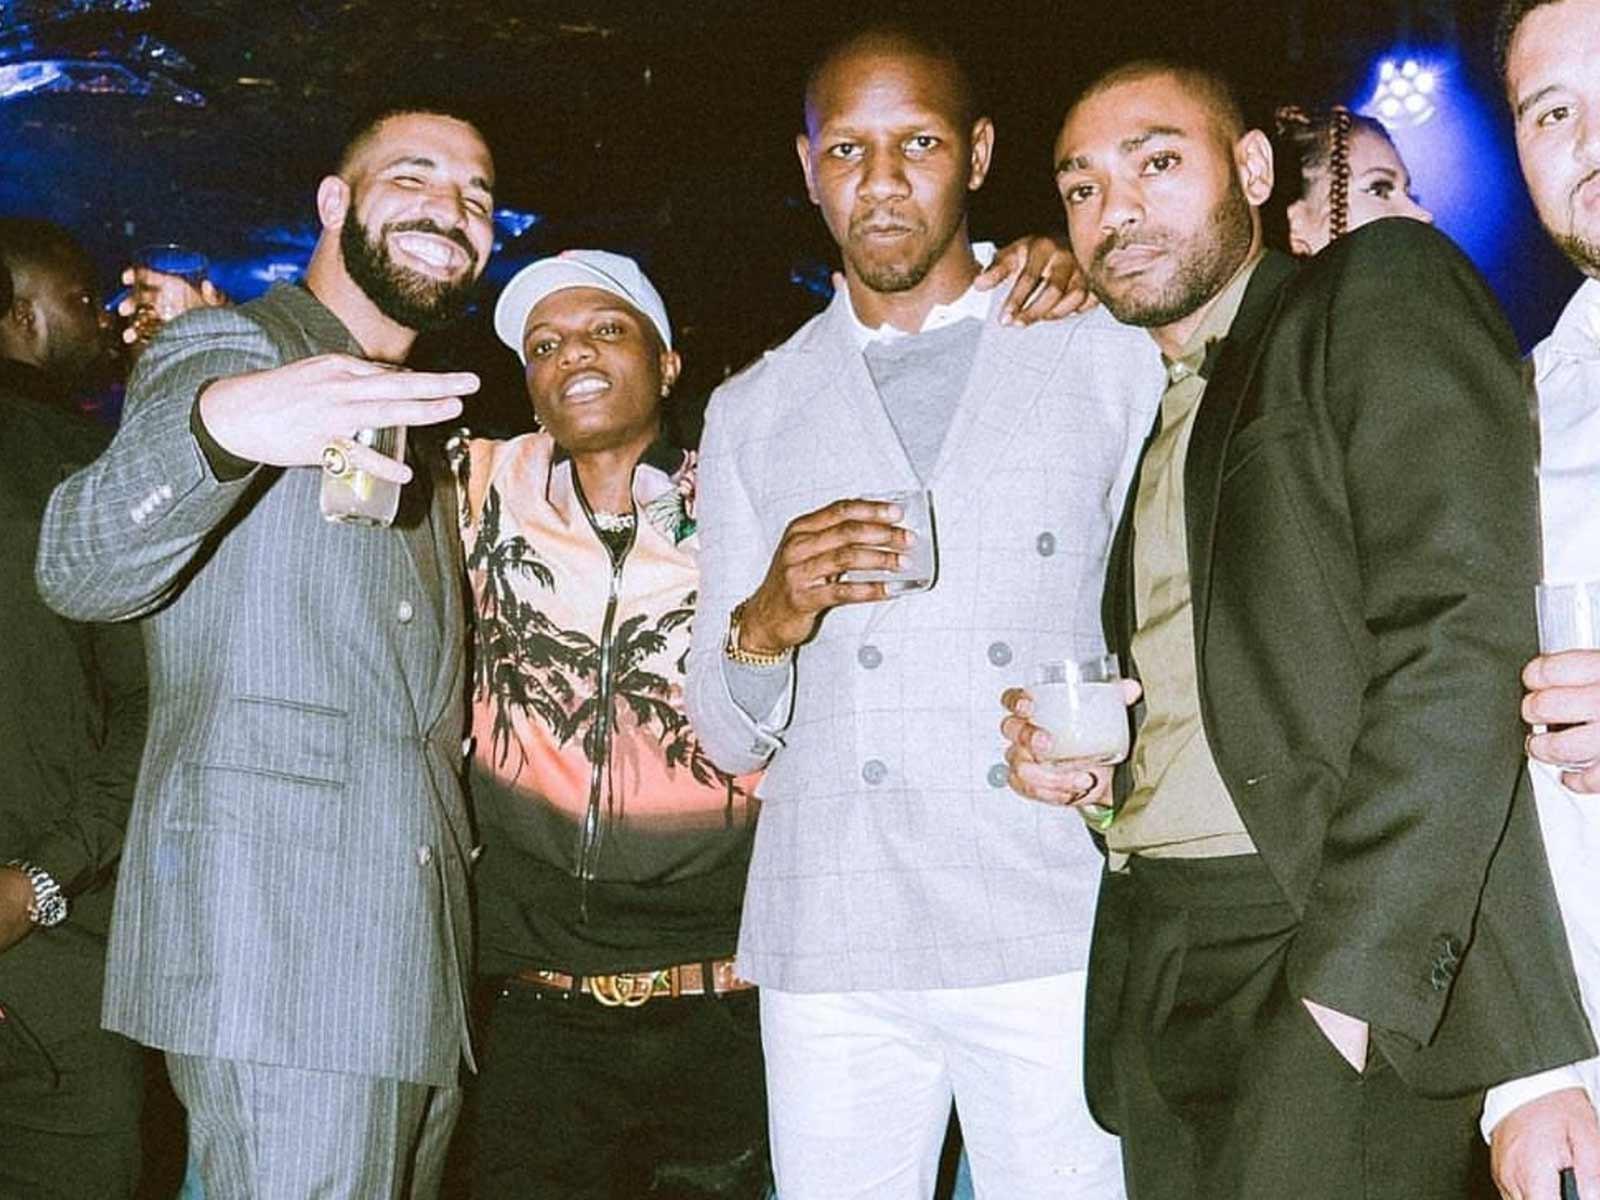 Inside Drake’s Extravagant, Members Only Listening Party That Broke the Cardinal Rule